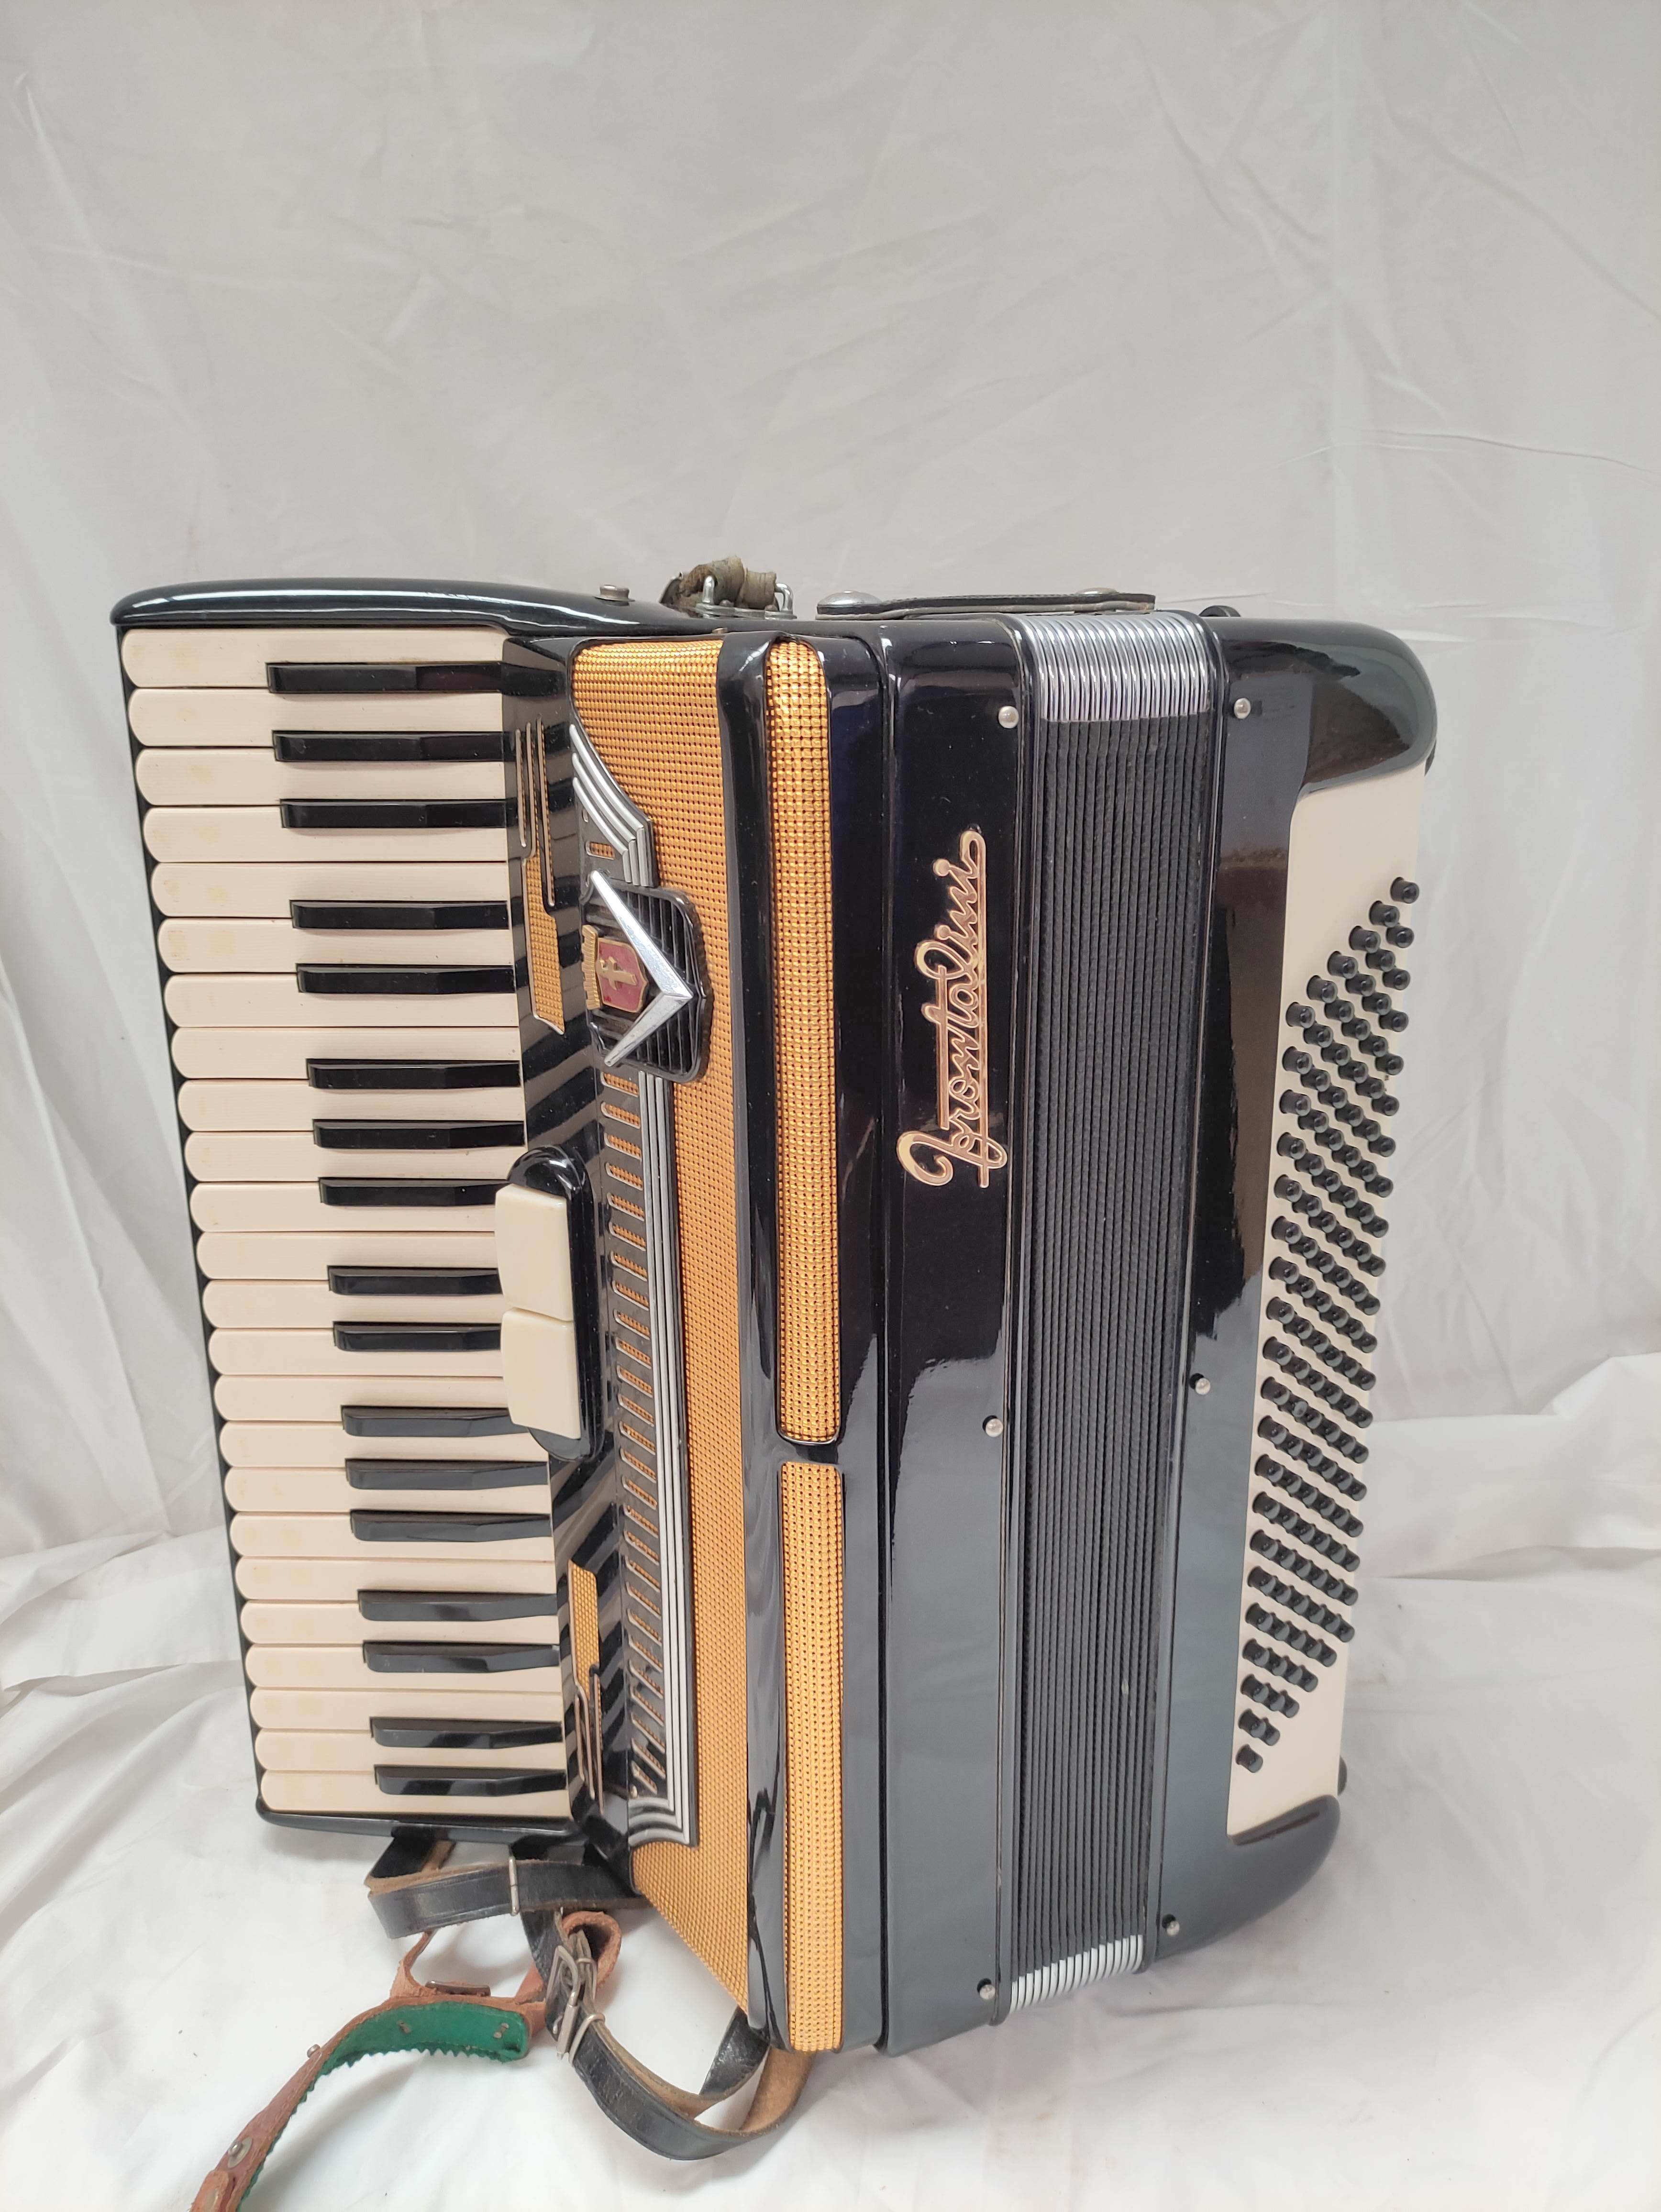 Broutalini boxed accordion in fitted case. - Image 4 of 5